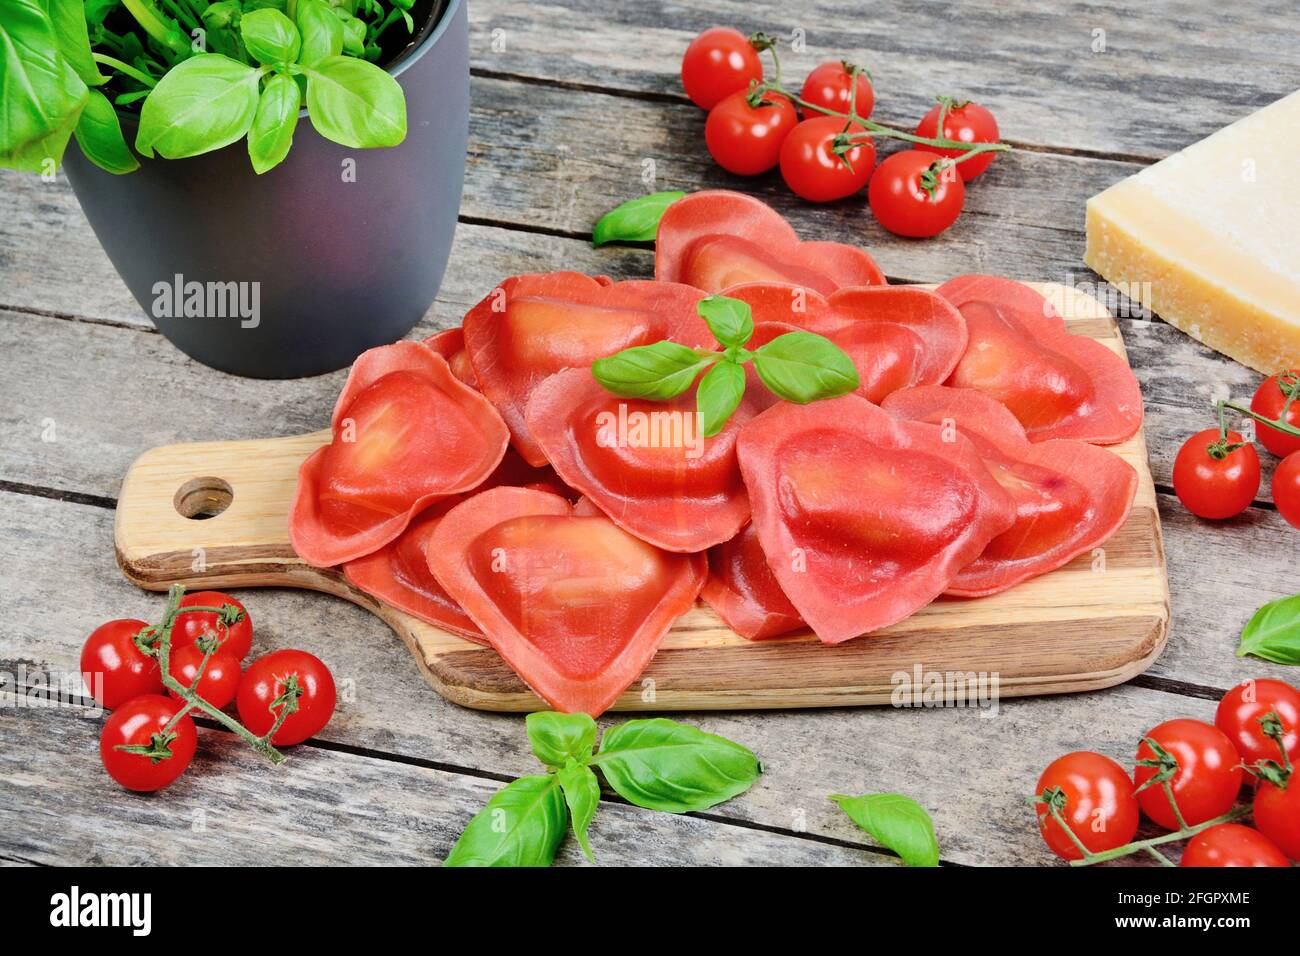 Red heart ravioli with tomato, mozzarella and basil on a wood background close up Stock Photo